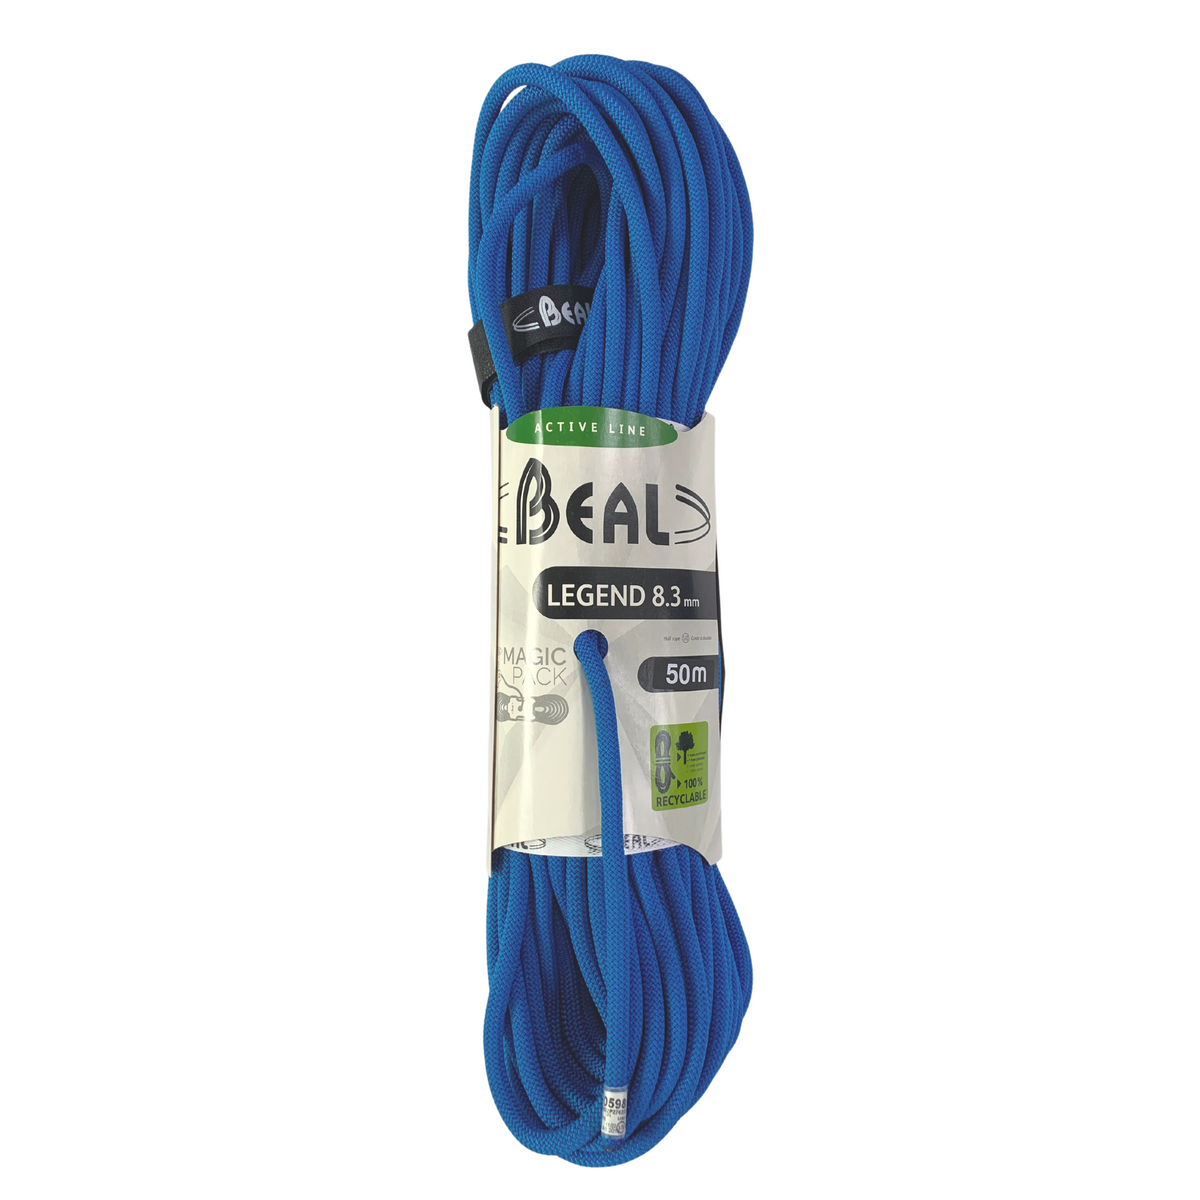 Beal Legend 8.3mm climbing rope in blue